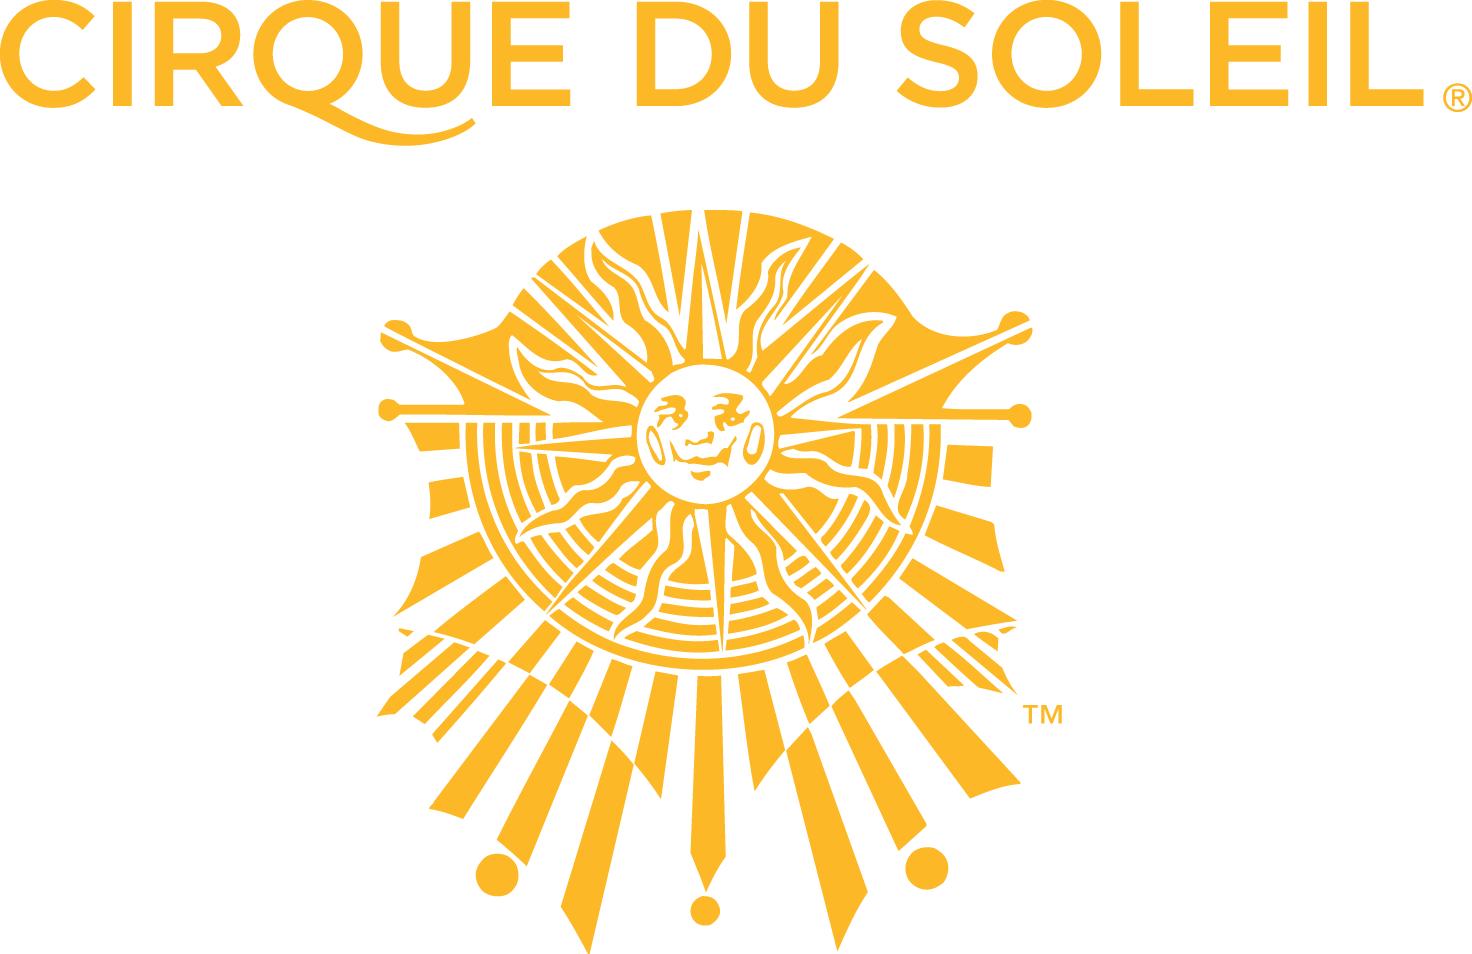 Cirque du Soleil will create the Toronto 2015 Opening Ceremony